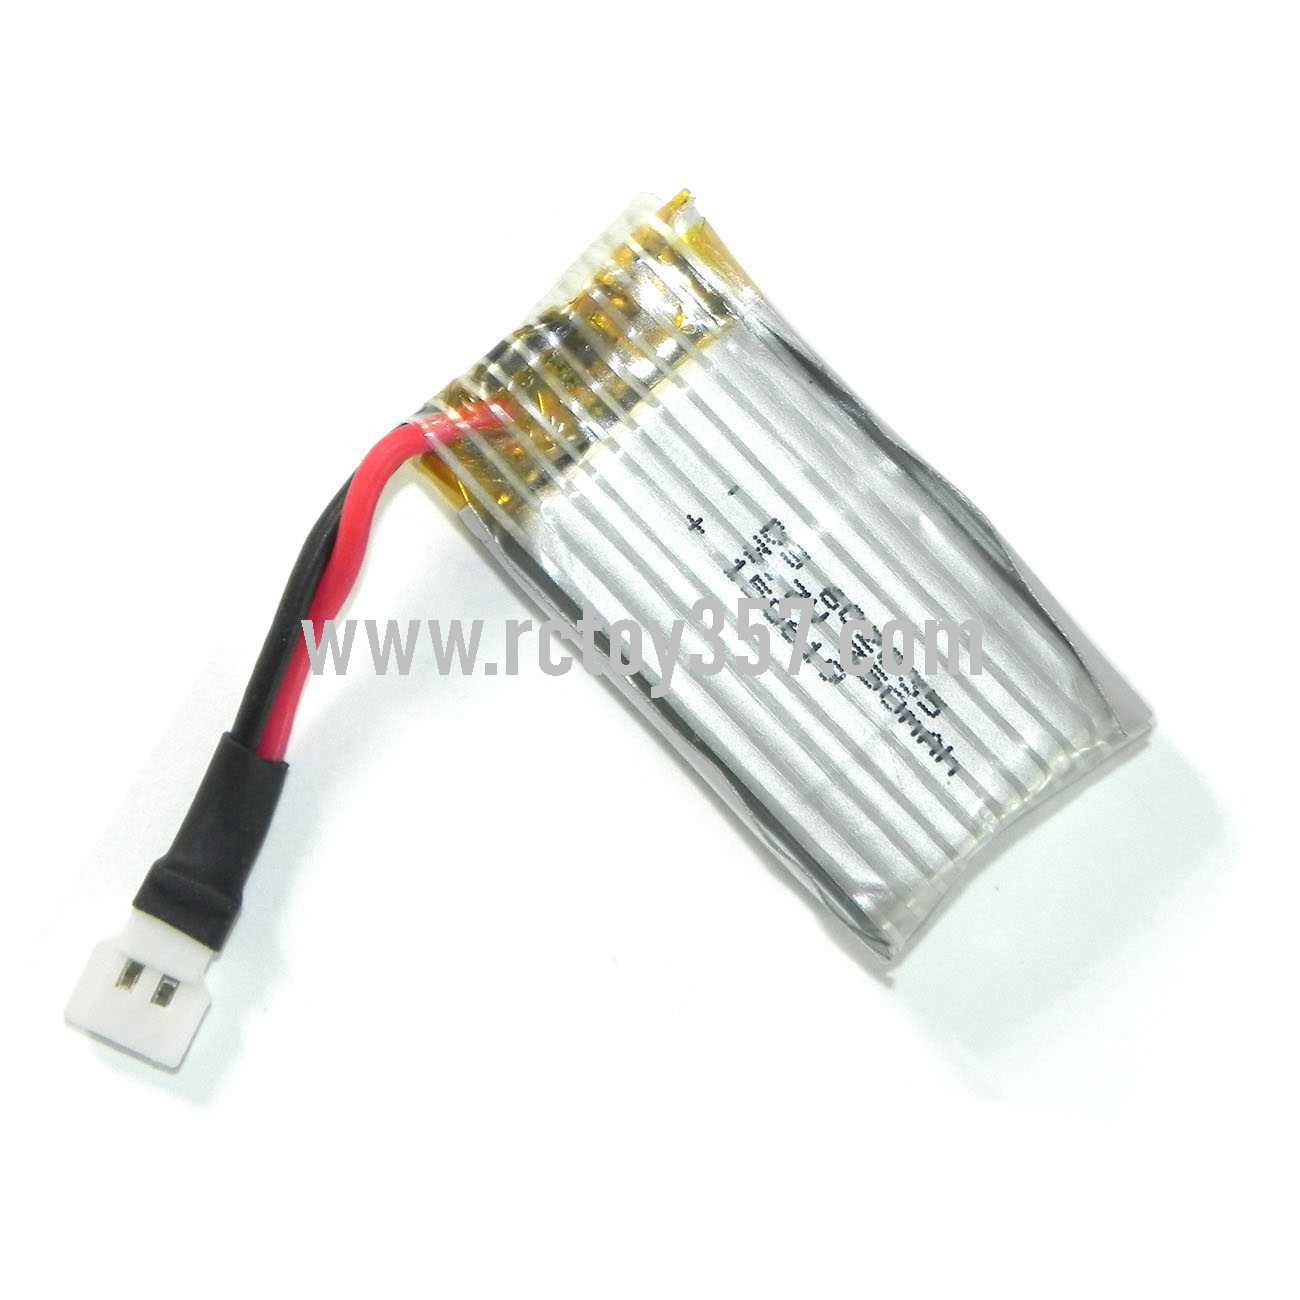 Holy Stone F180C RC Quadcopter toy Parts Battery 3.7V 350mAh